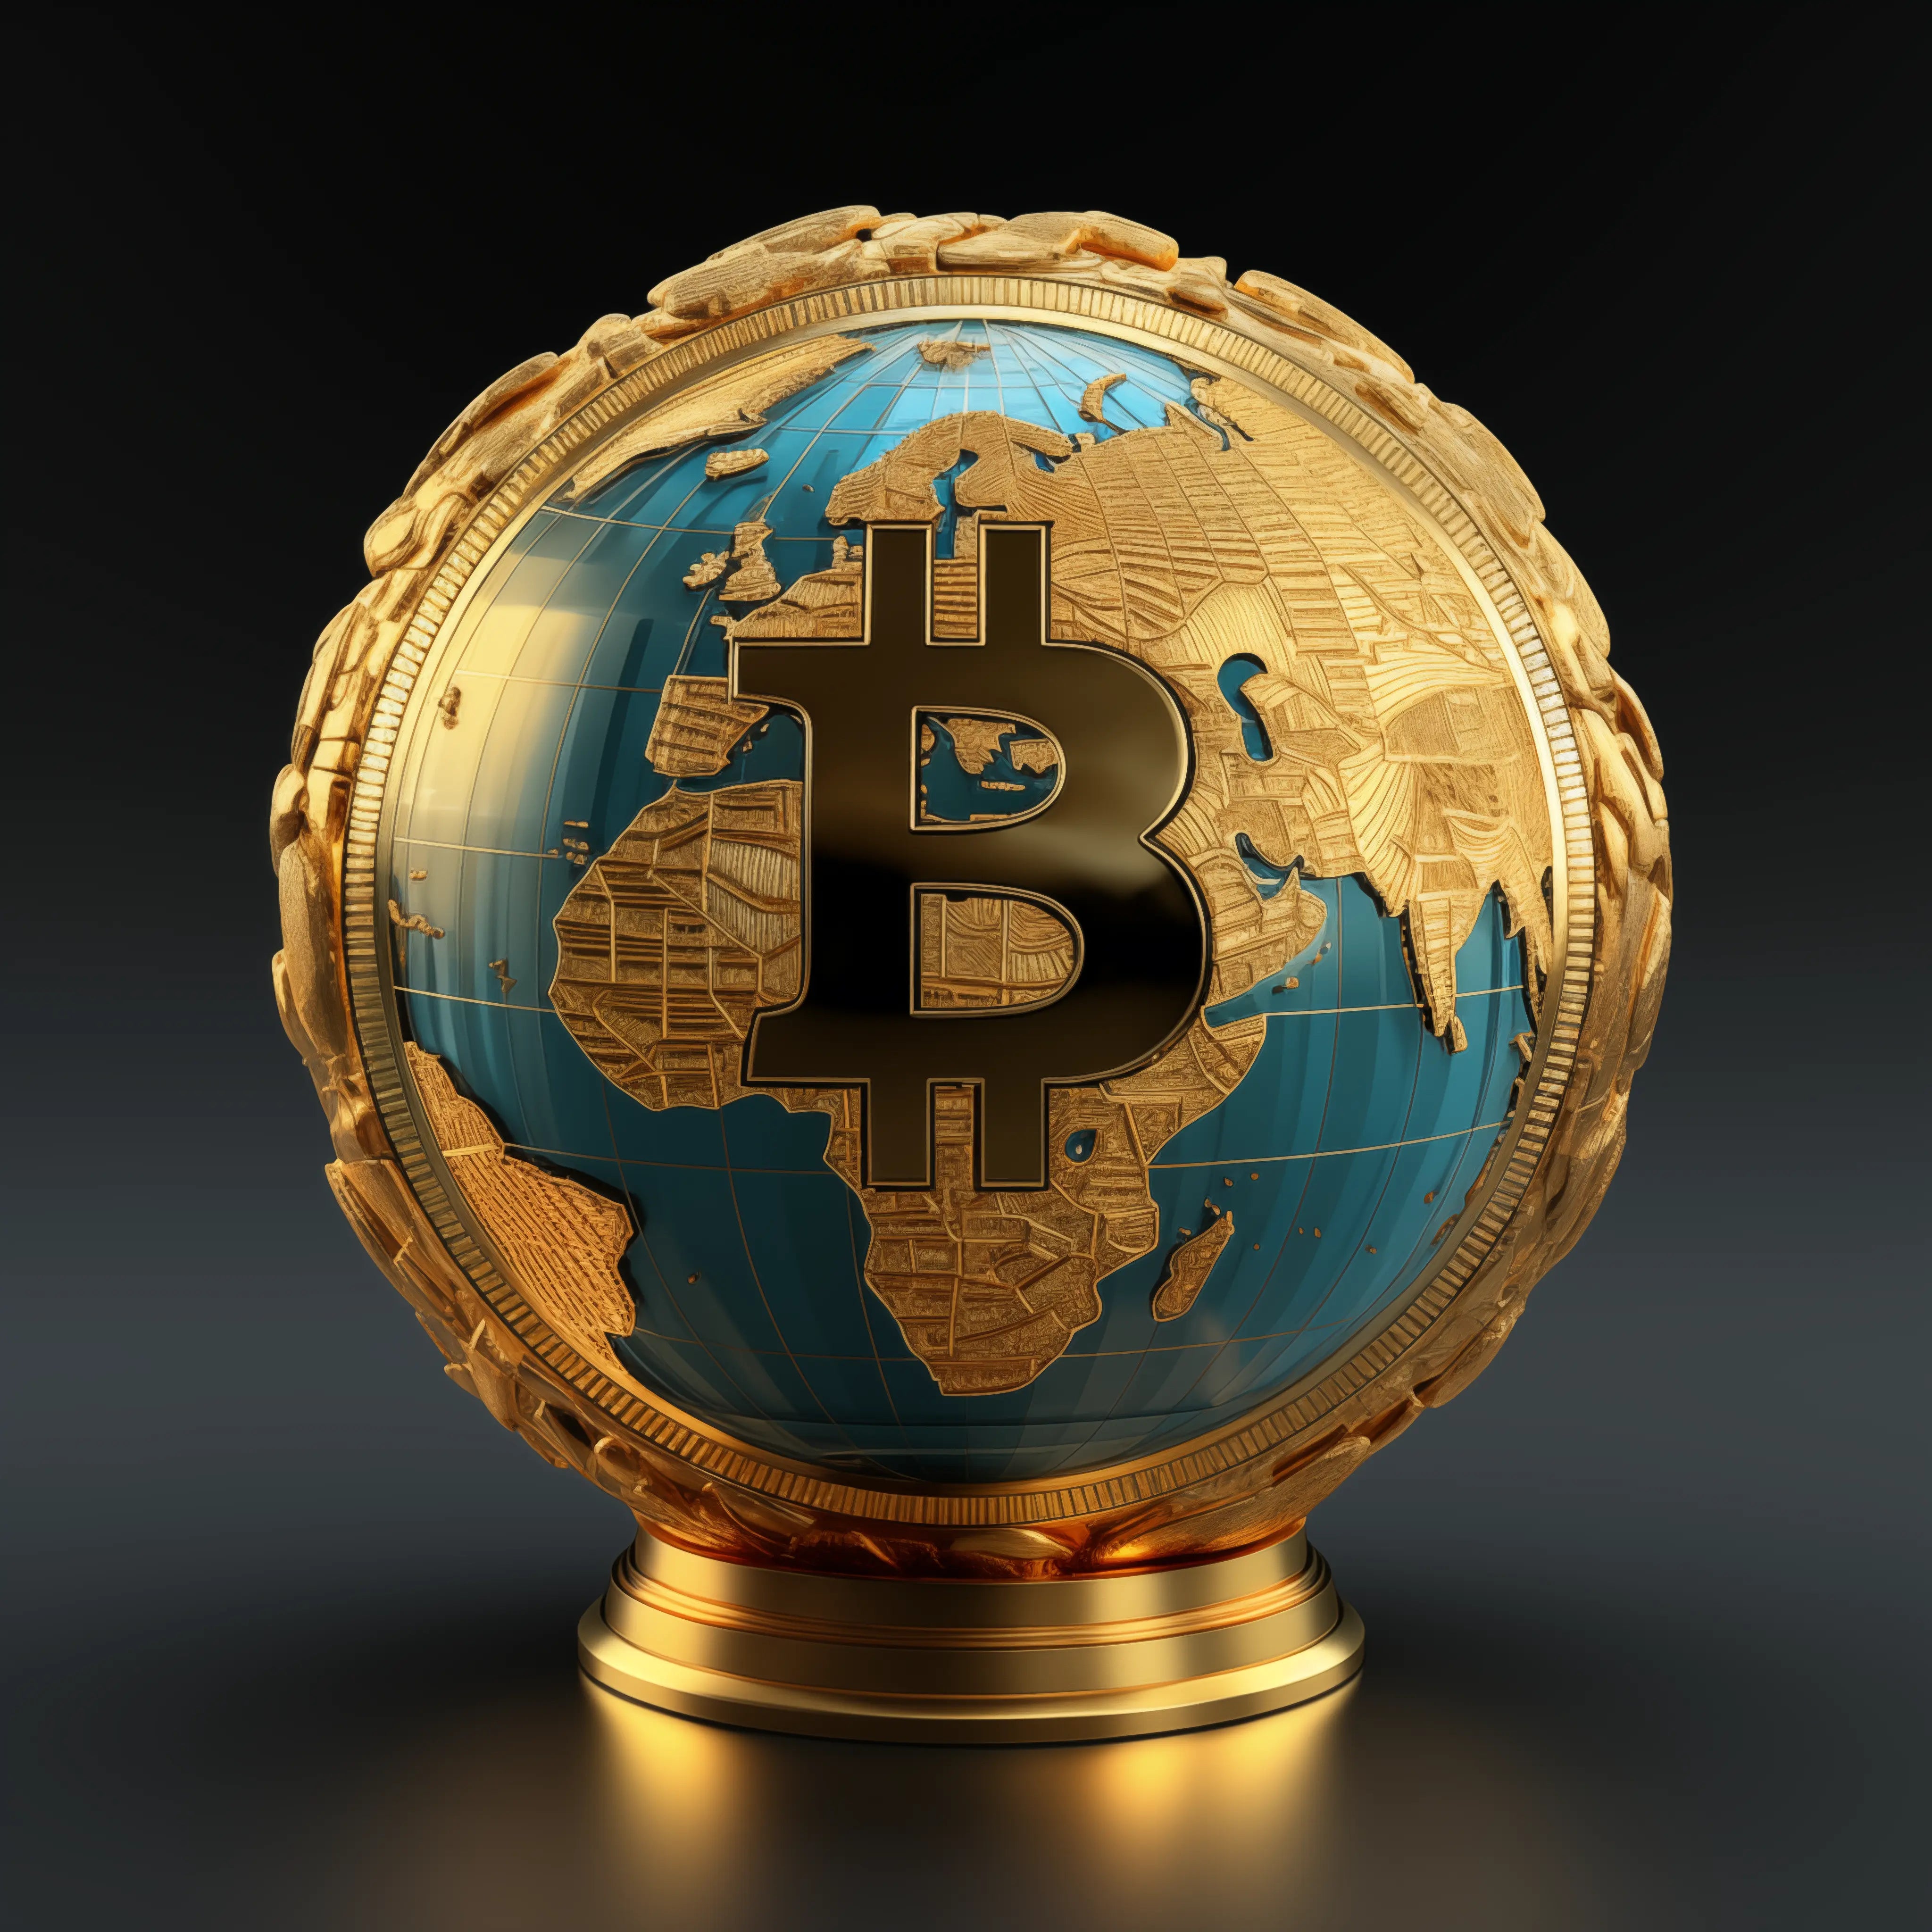 "Bitcoin: The Digital Revolution of 'Store of Value' - Store of Value